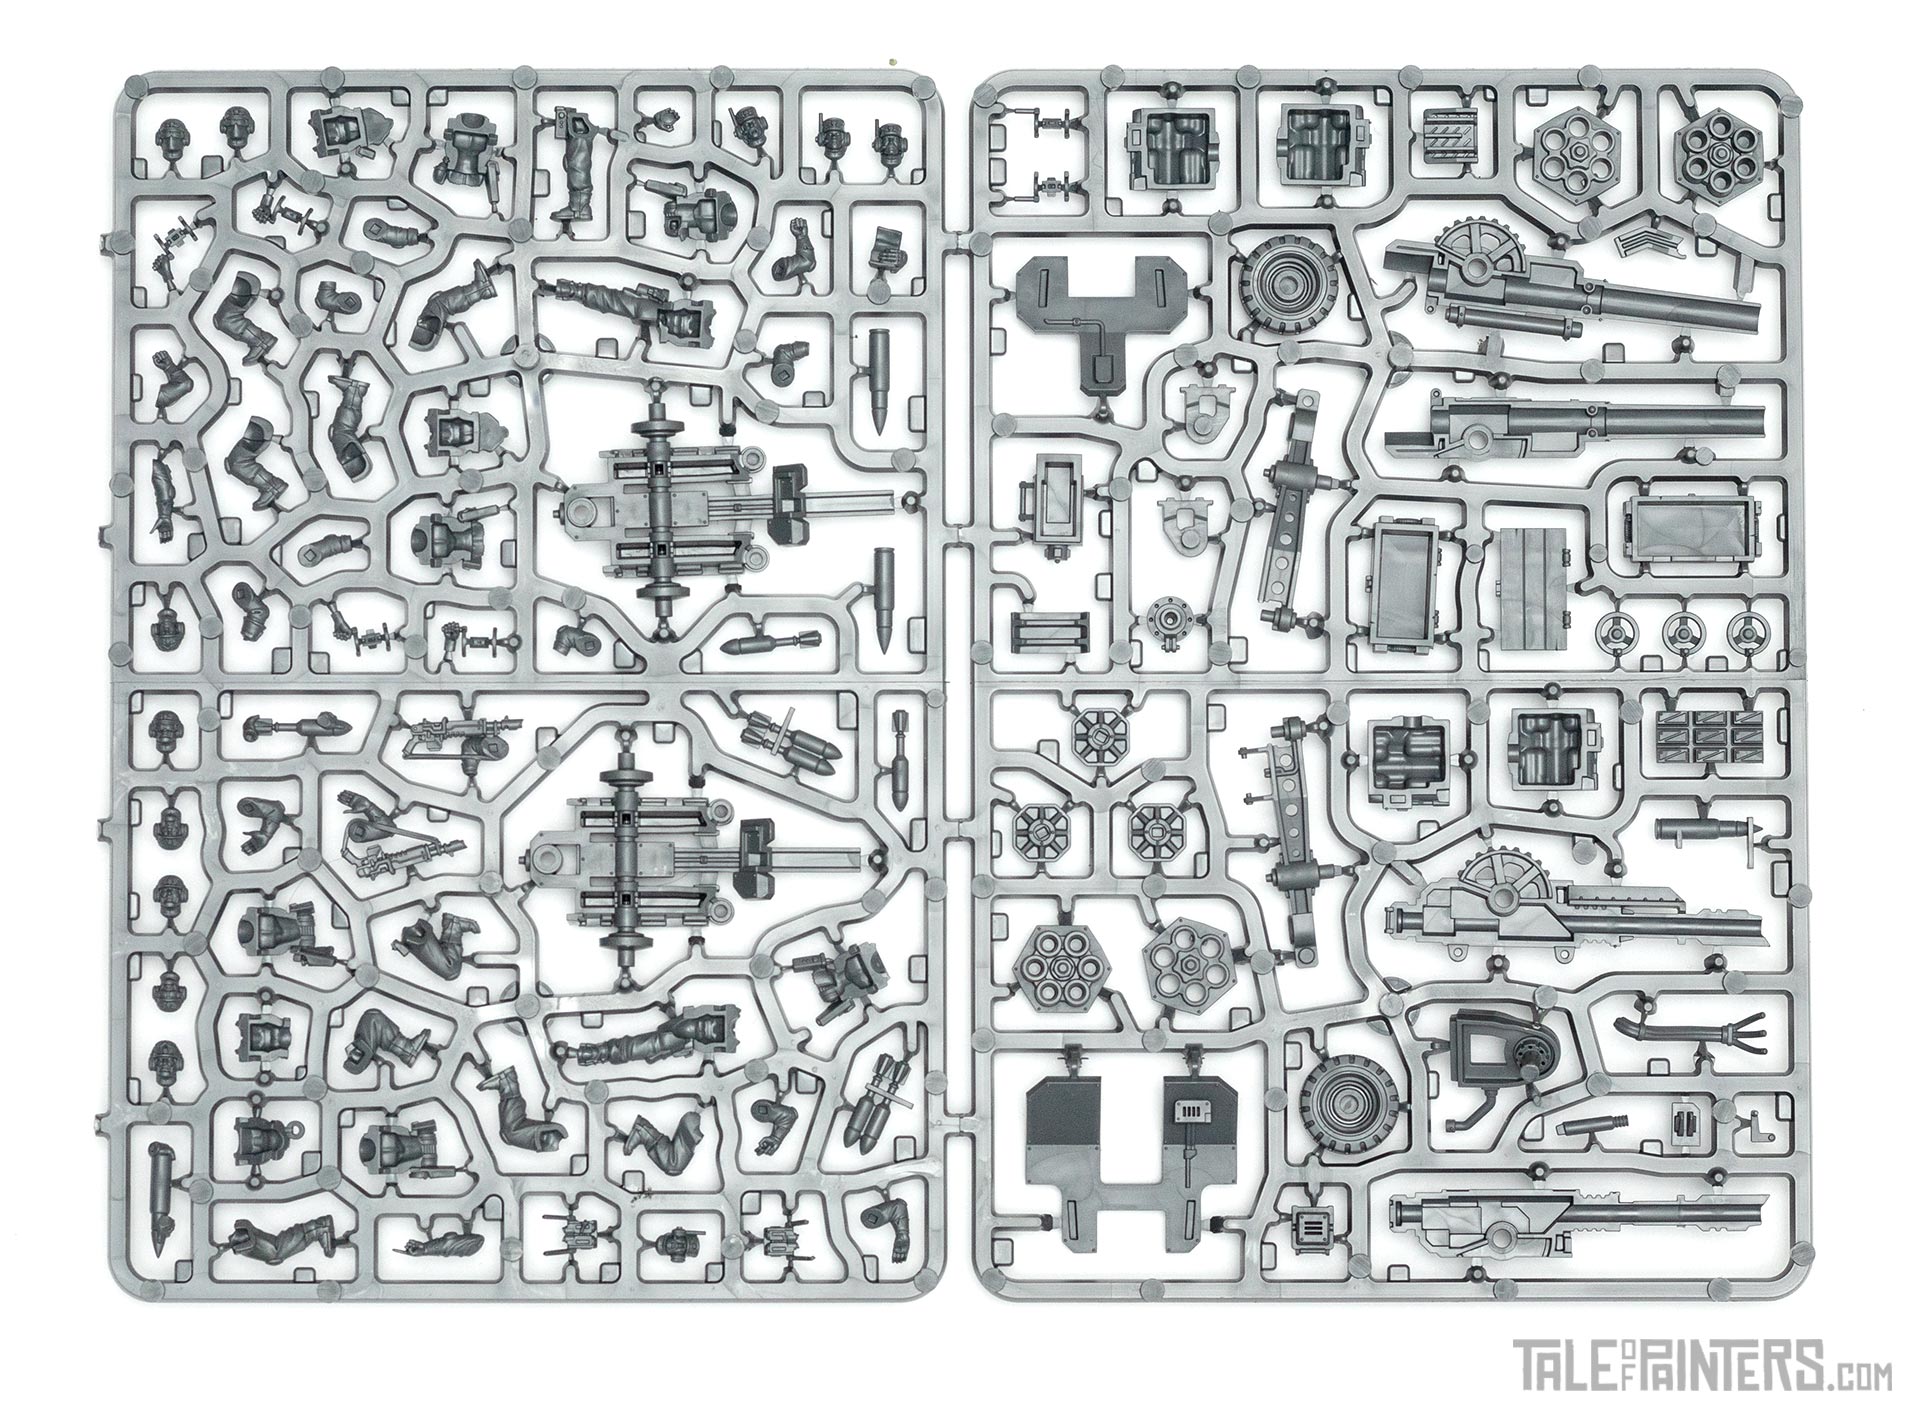 Cadian Field Ordnance Battery Team Sprue 1 from the Astra Militarum Army Set